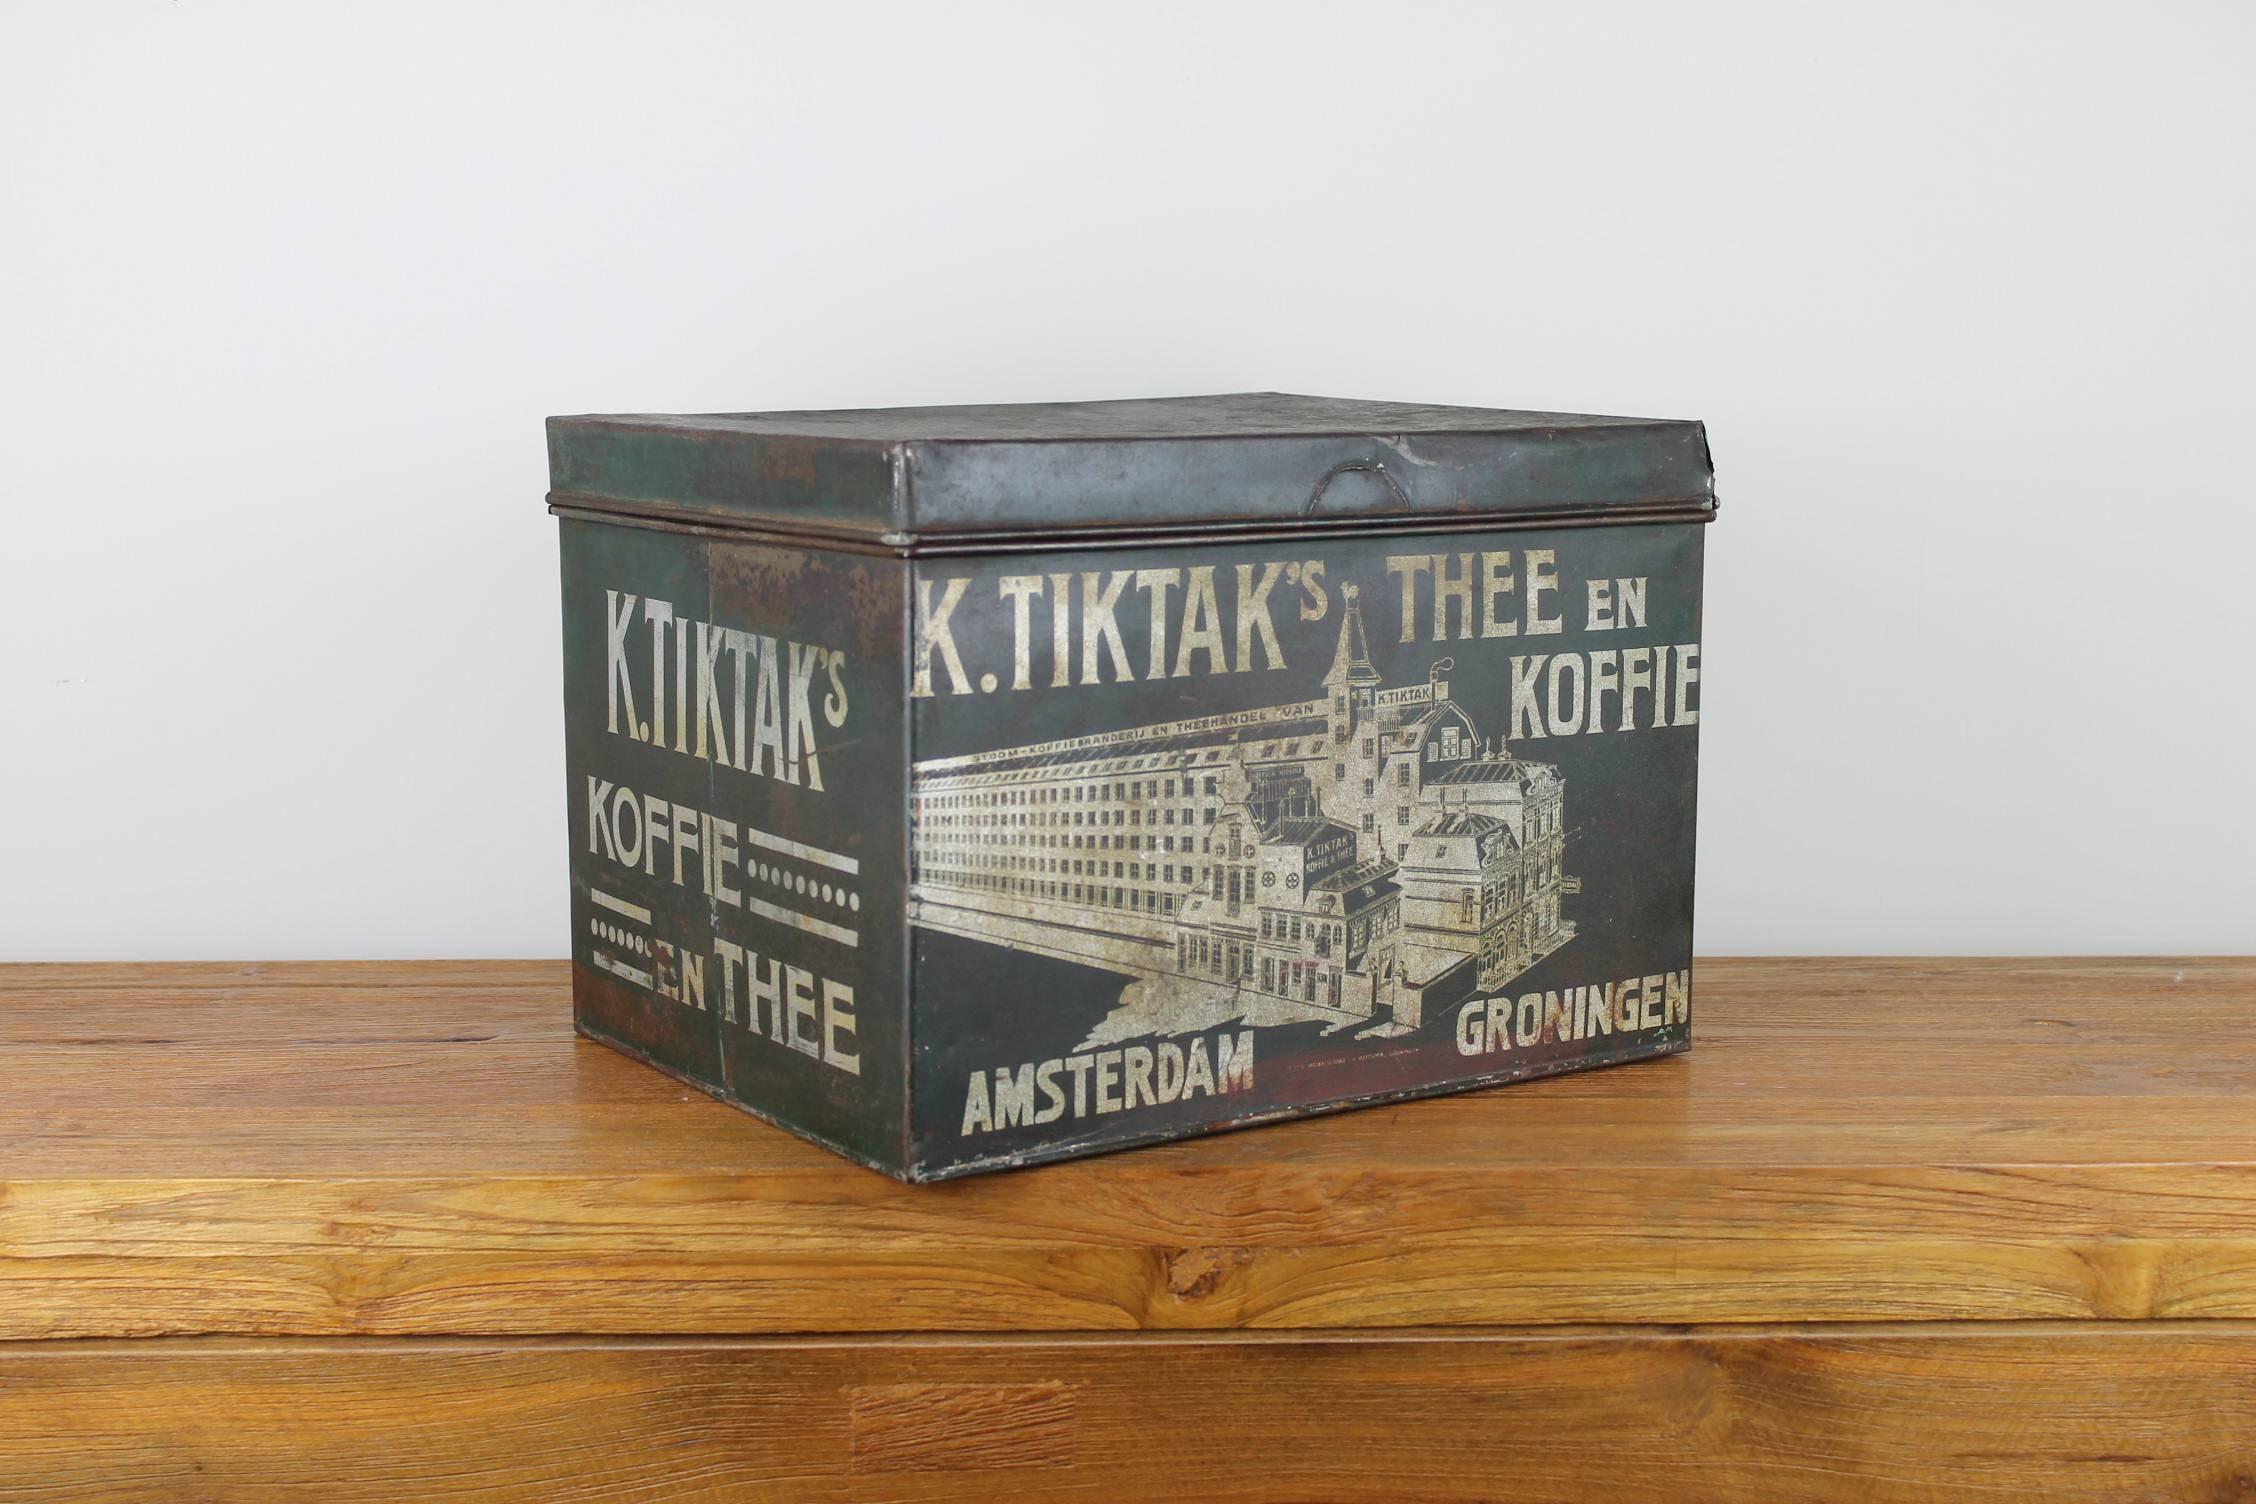 Antique Coffee and Tea Tin from the Early 20th Century.
Designed and made for K.Tiktak Coffee and Tea Factory, which was located in Amsterdam and Groningen Holland , The Netherlands. 
A beautiful dark green Lithographic Tin - Decorative Box.

The